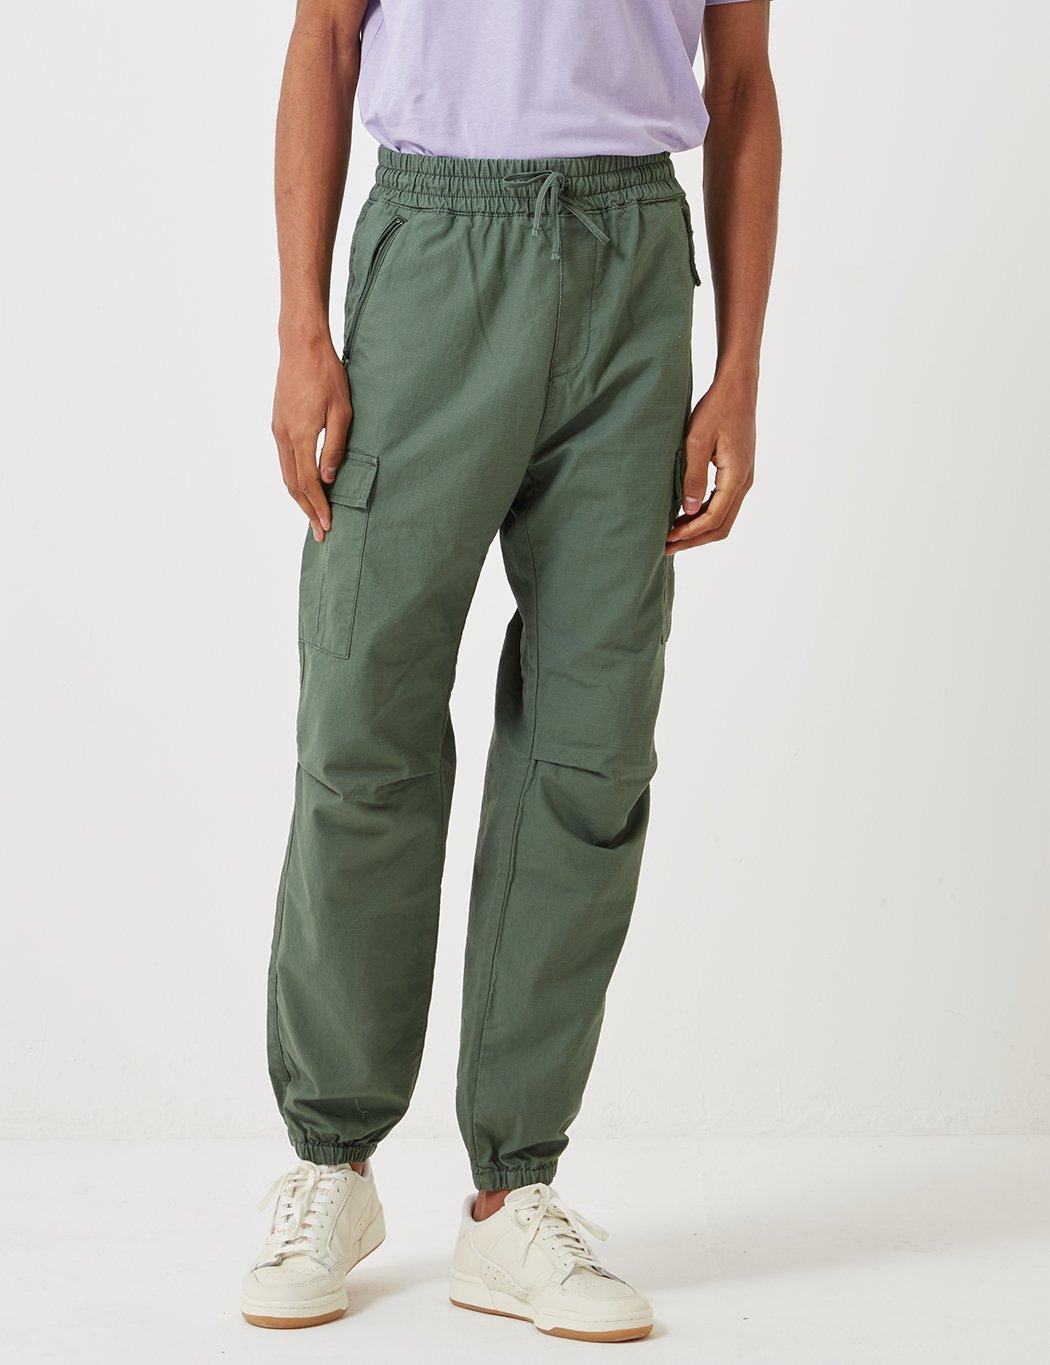 Carhartt Cotton Wip Cargo Jogger Pants (ripstop) in Green for Men - Lyst